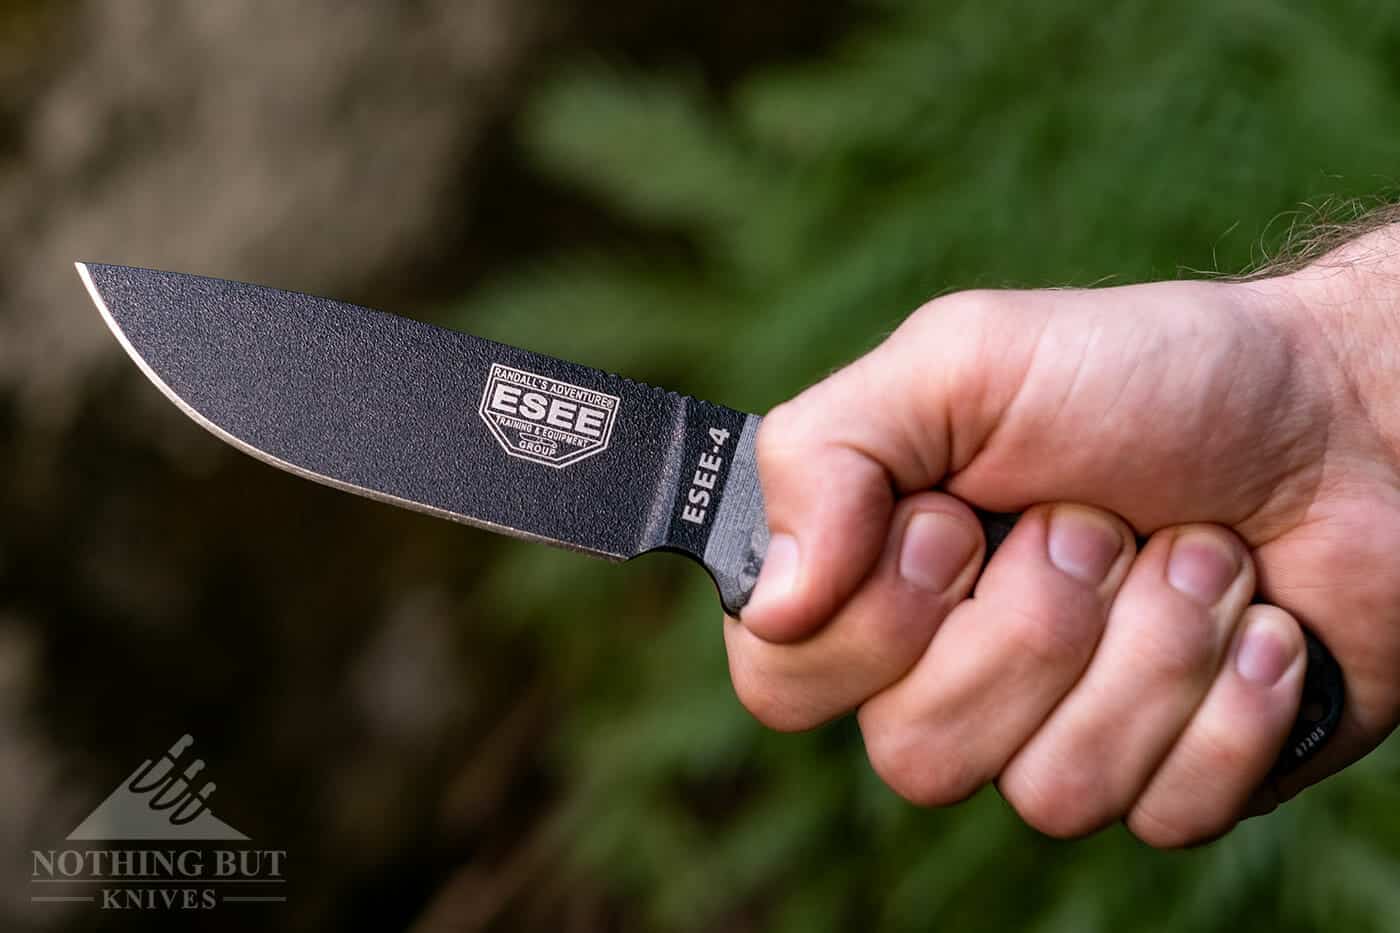 The Esee 4 handle is fairly short which prevents it from being a good chopping knife. 